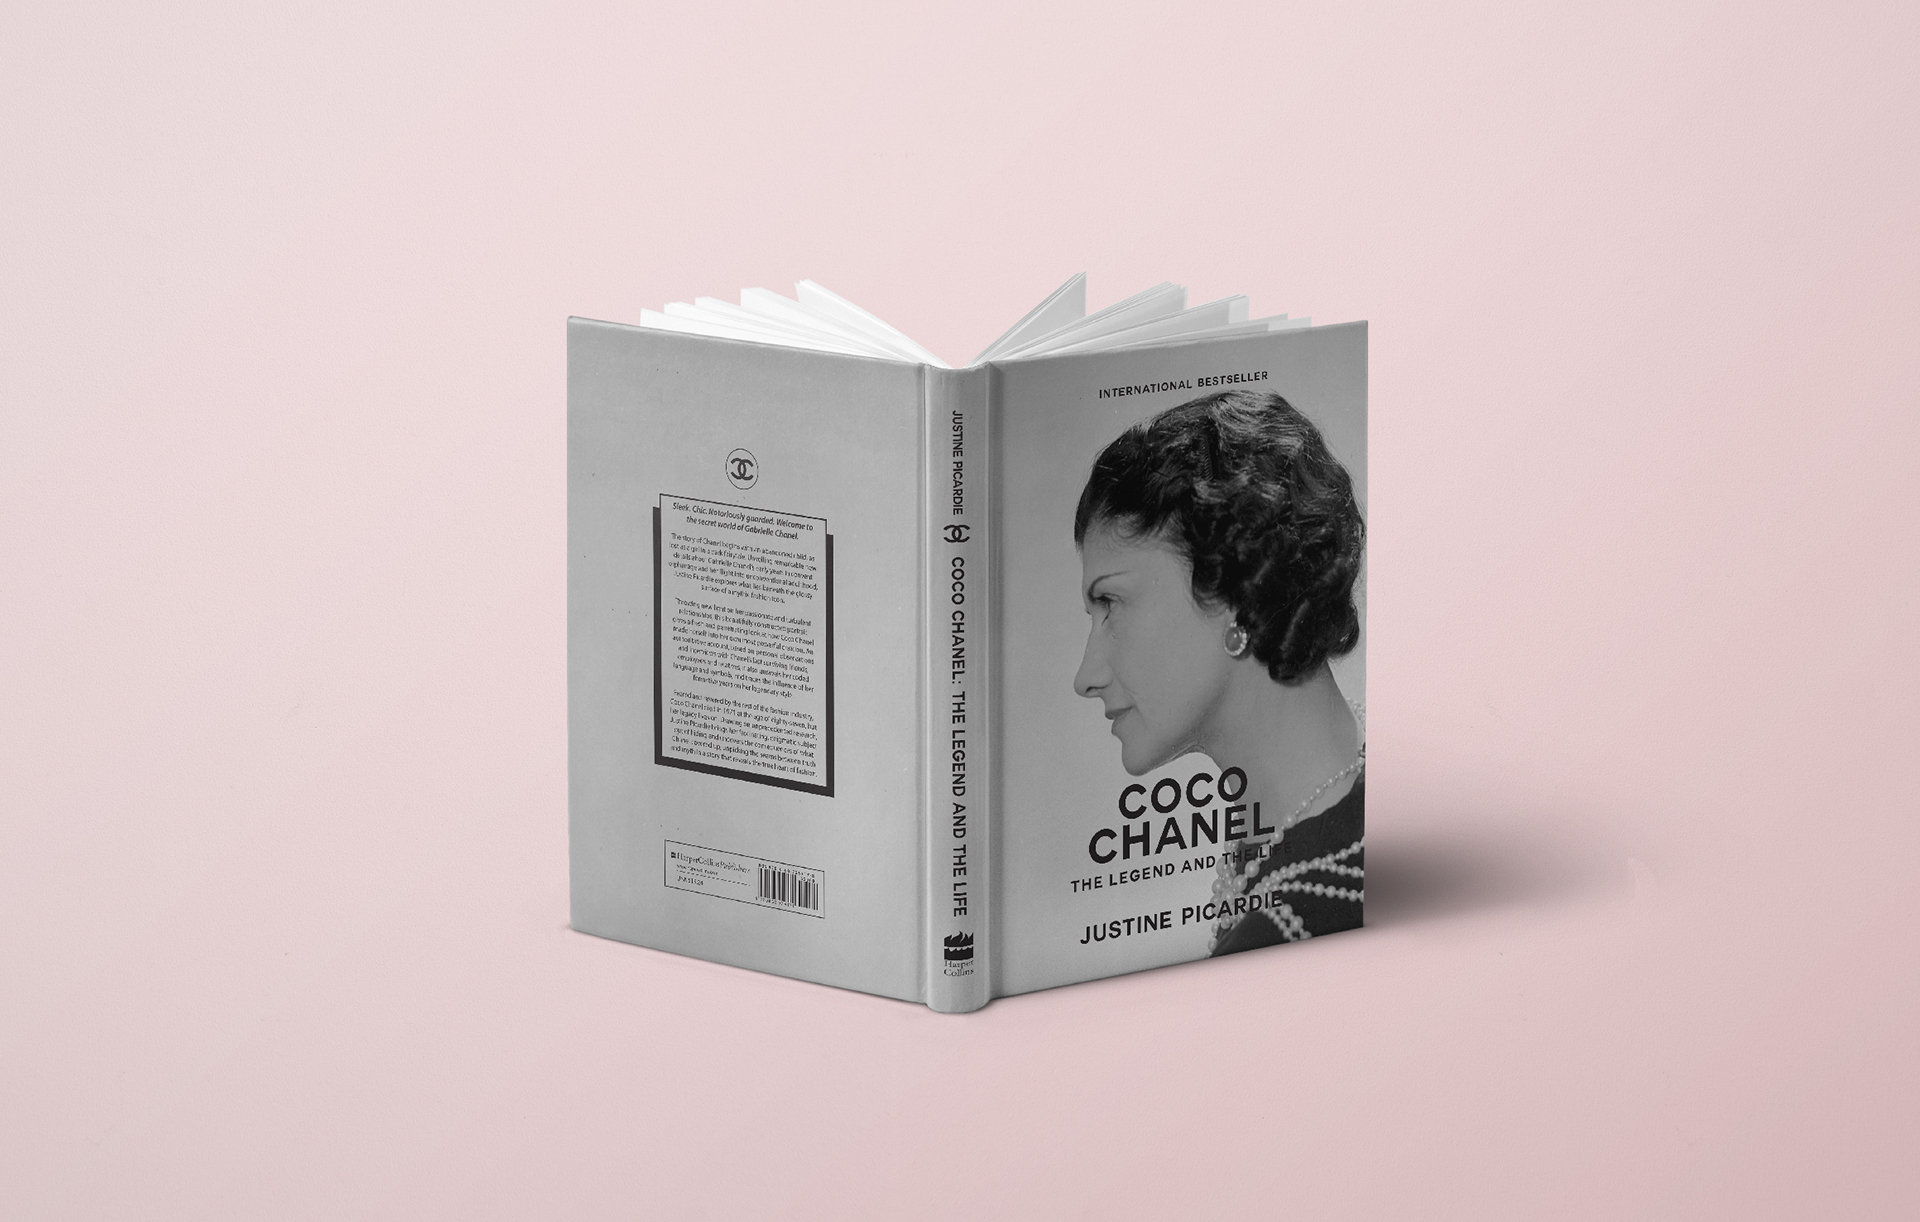 Coco Chanel: The Legend and The Life